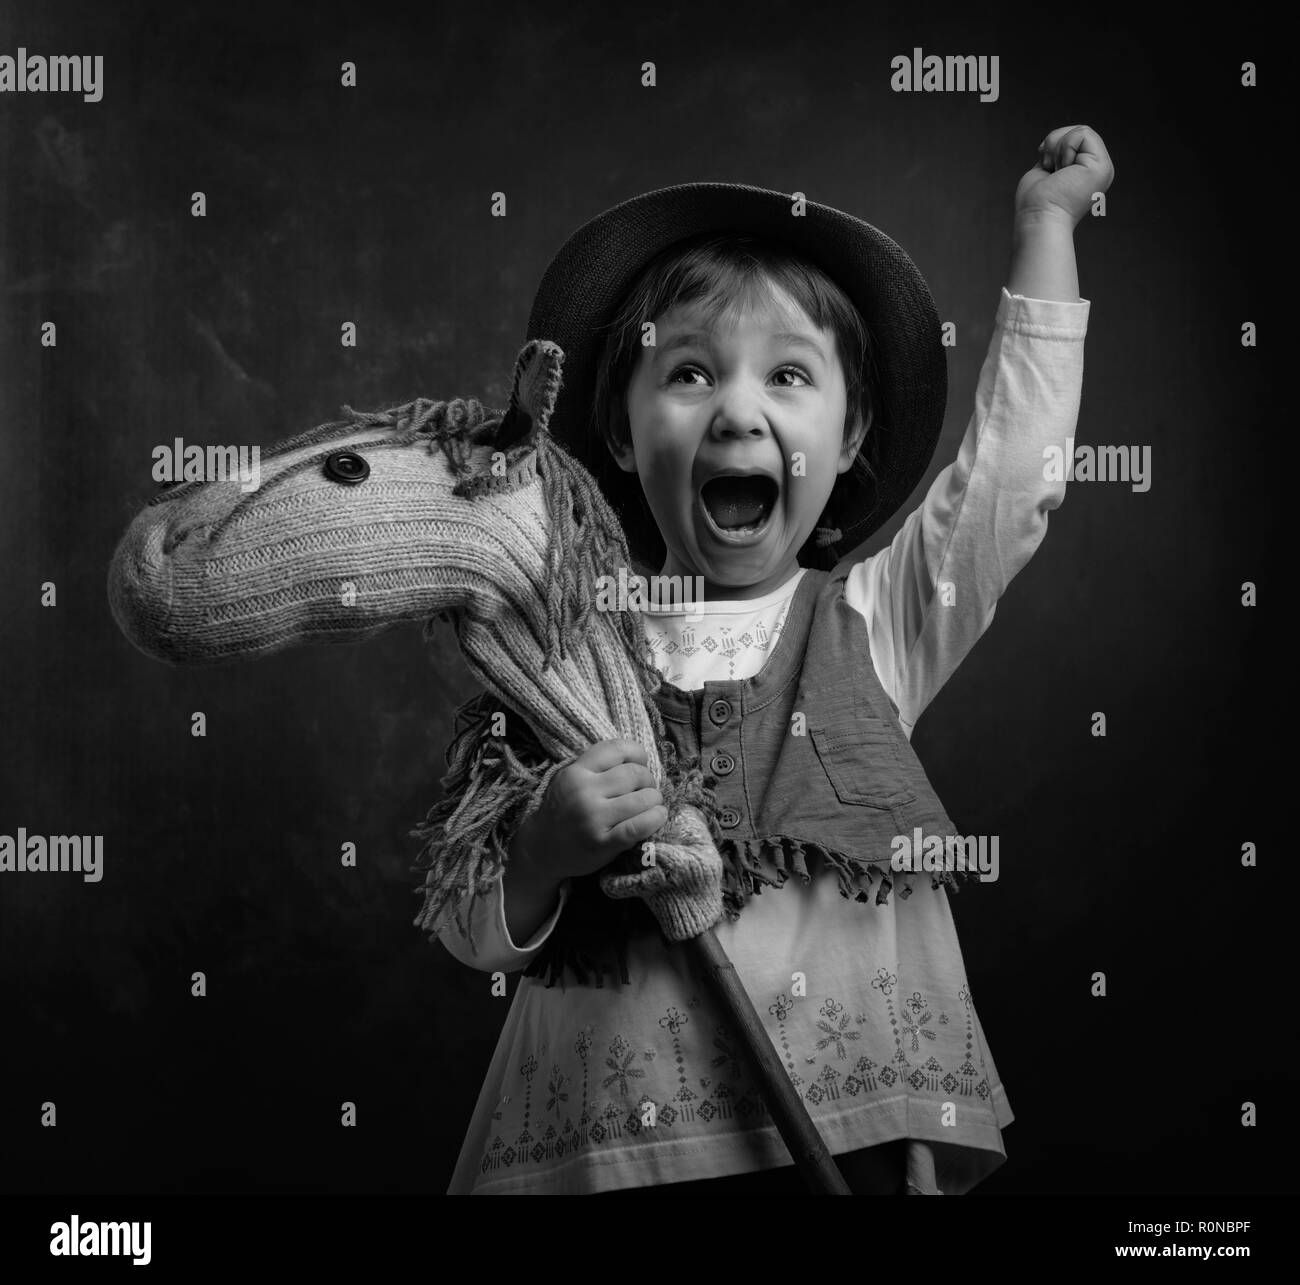 Screaming little girl with a homemade toy. Little girl dressed like a cowboy playing with a homemade horse. Expressive facial expressions. Black and w Stock Photo